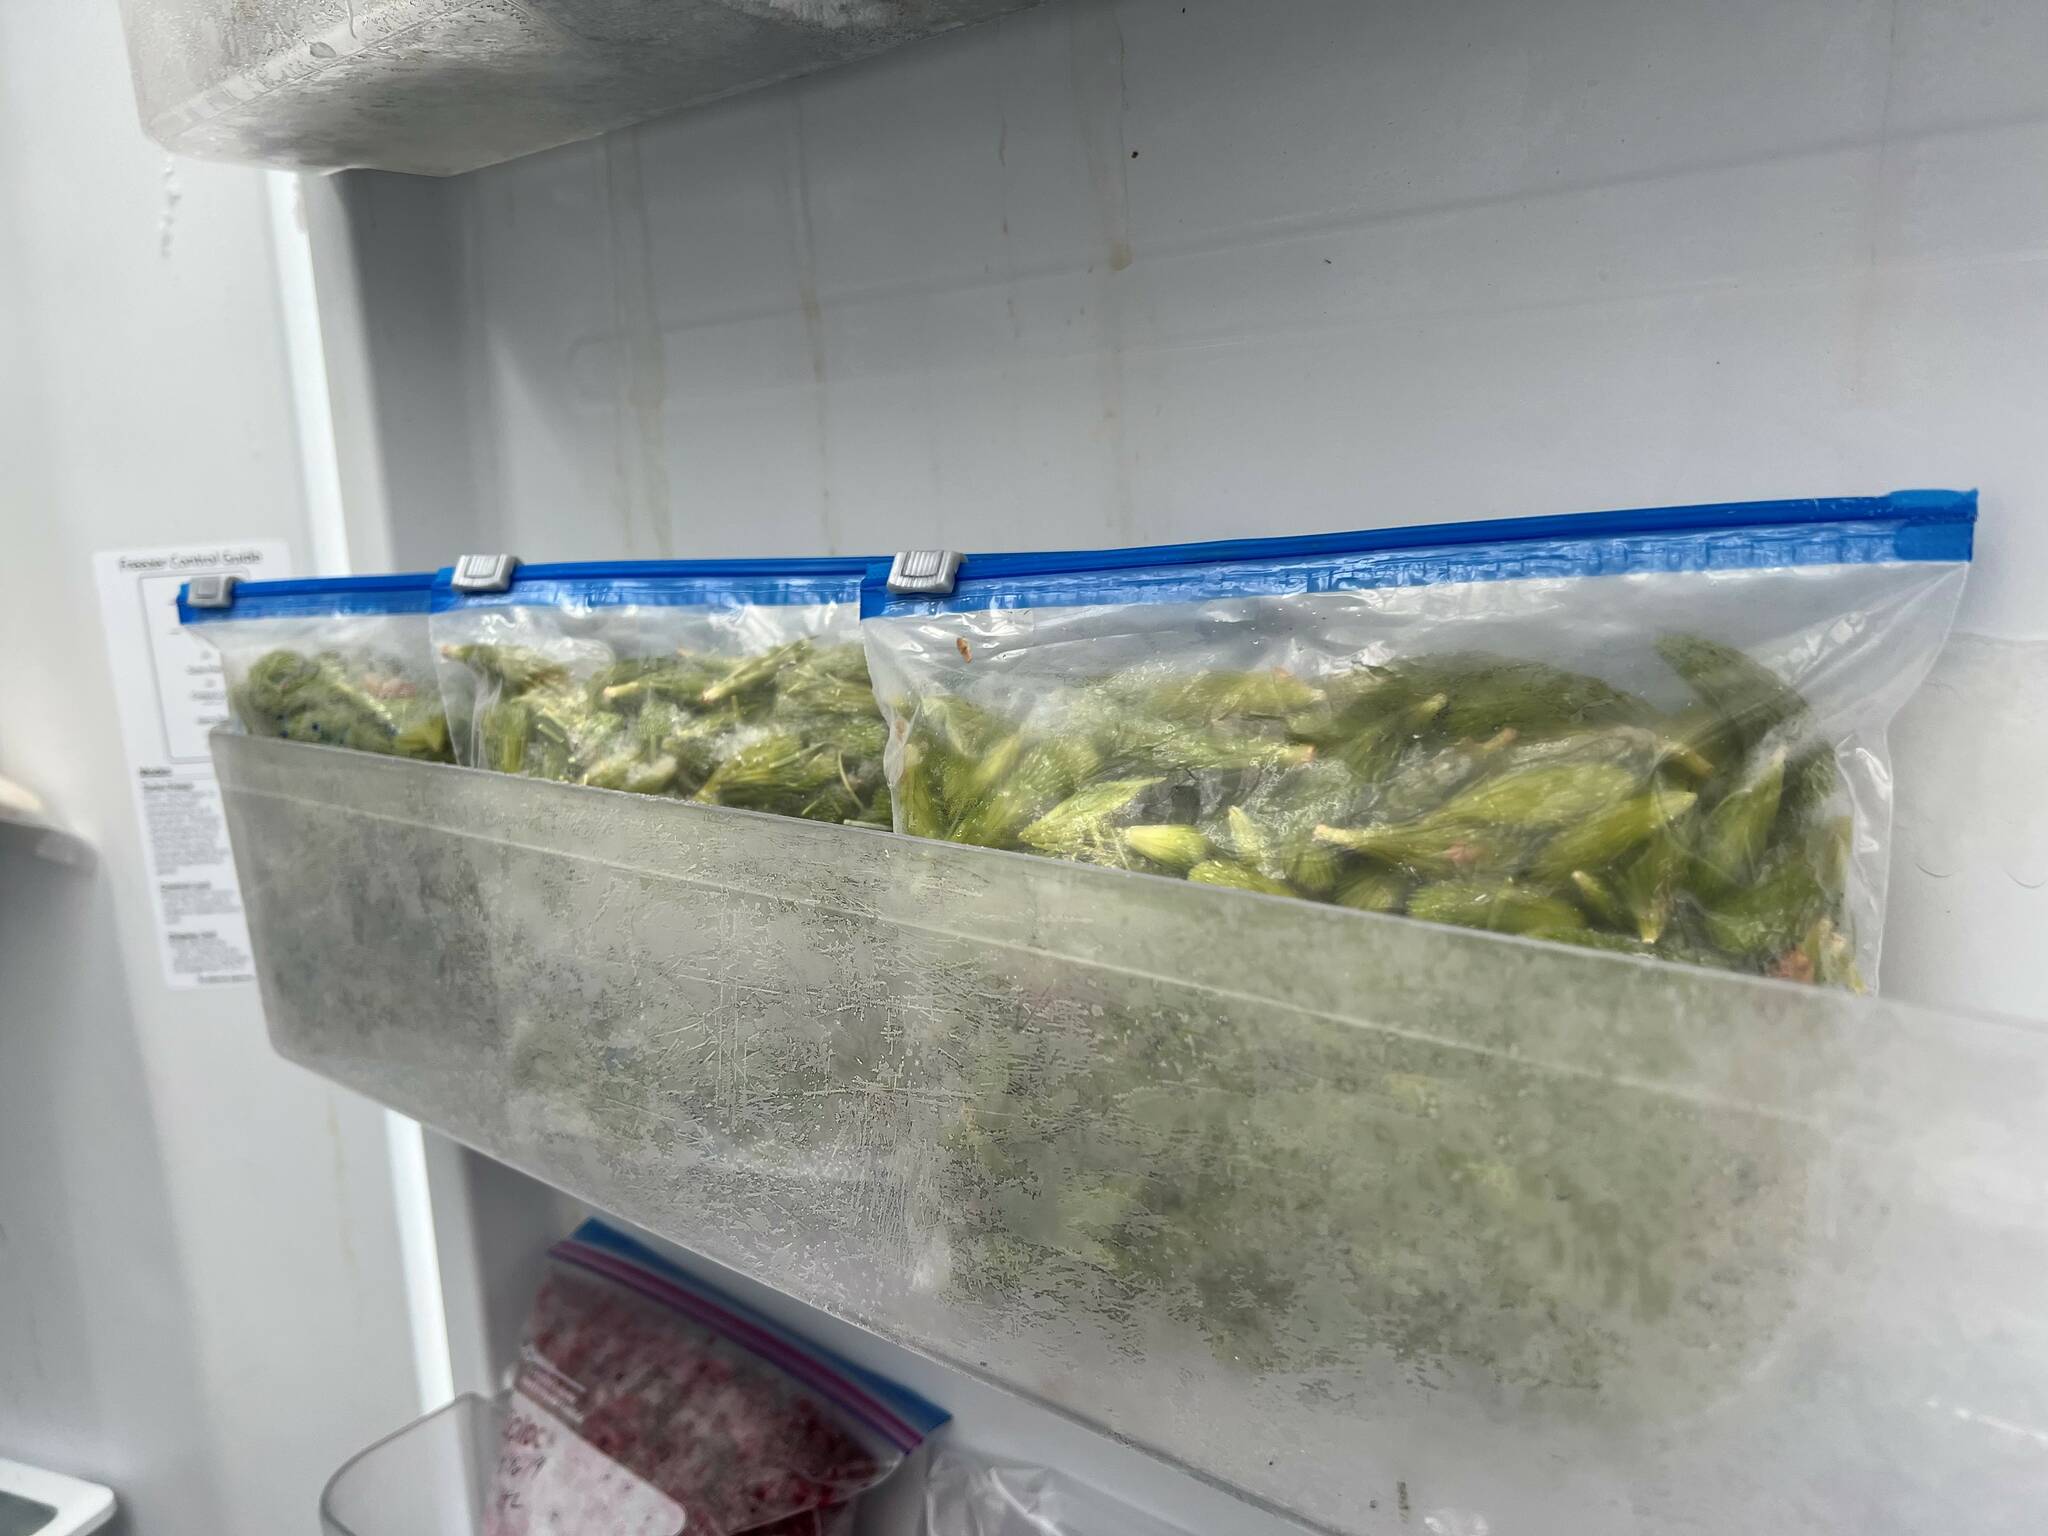 Spruce tips preserved in freezer baggies. (Vivian Faith Prescott / For the Capital City Weekly)